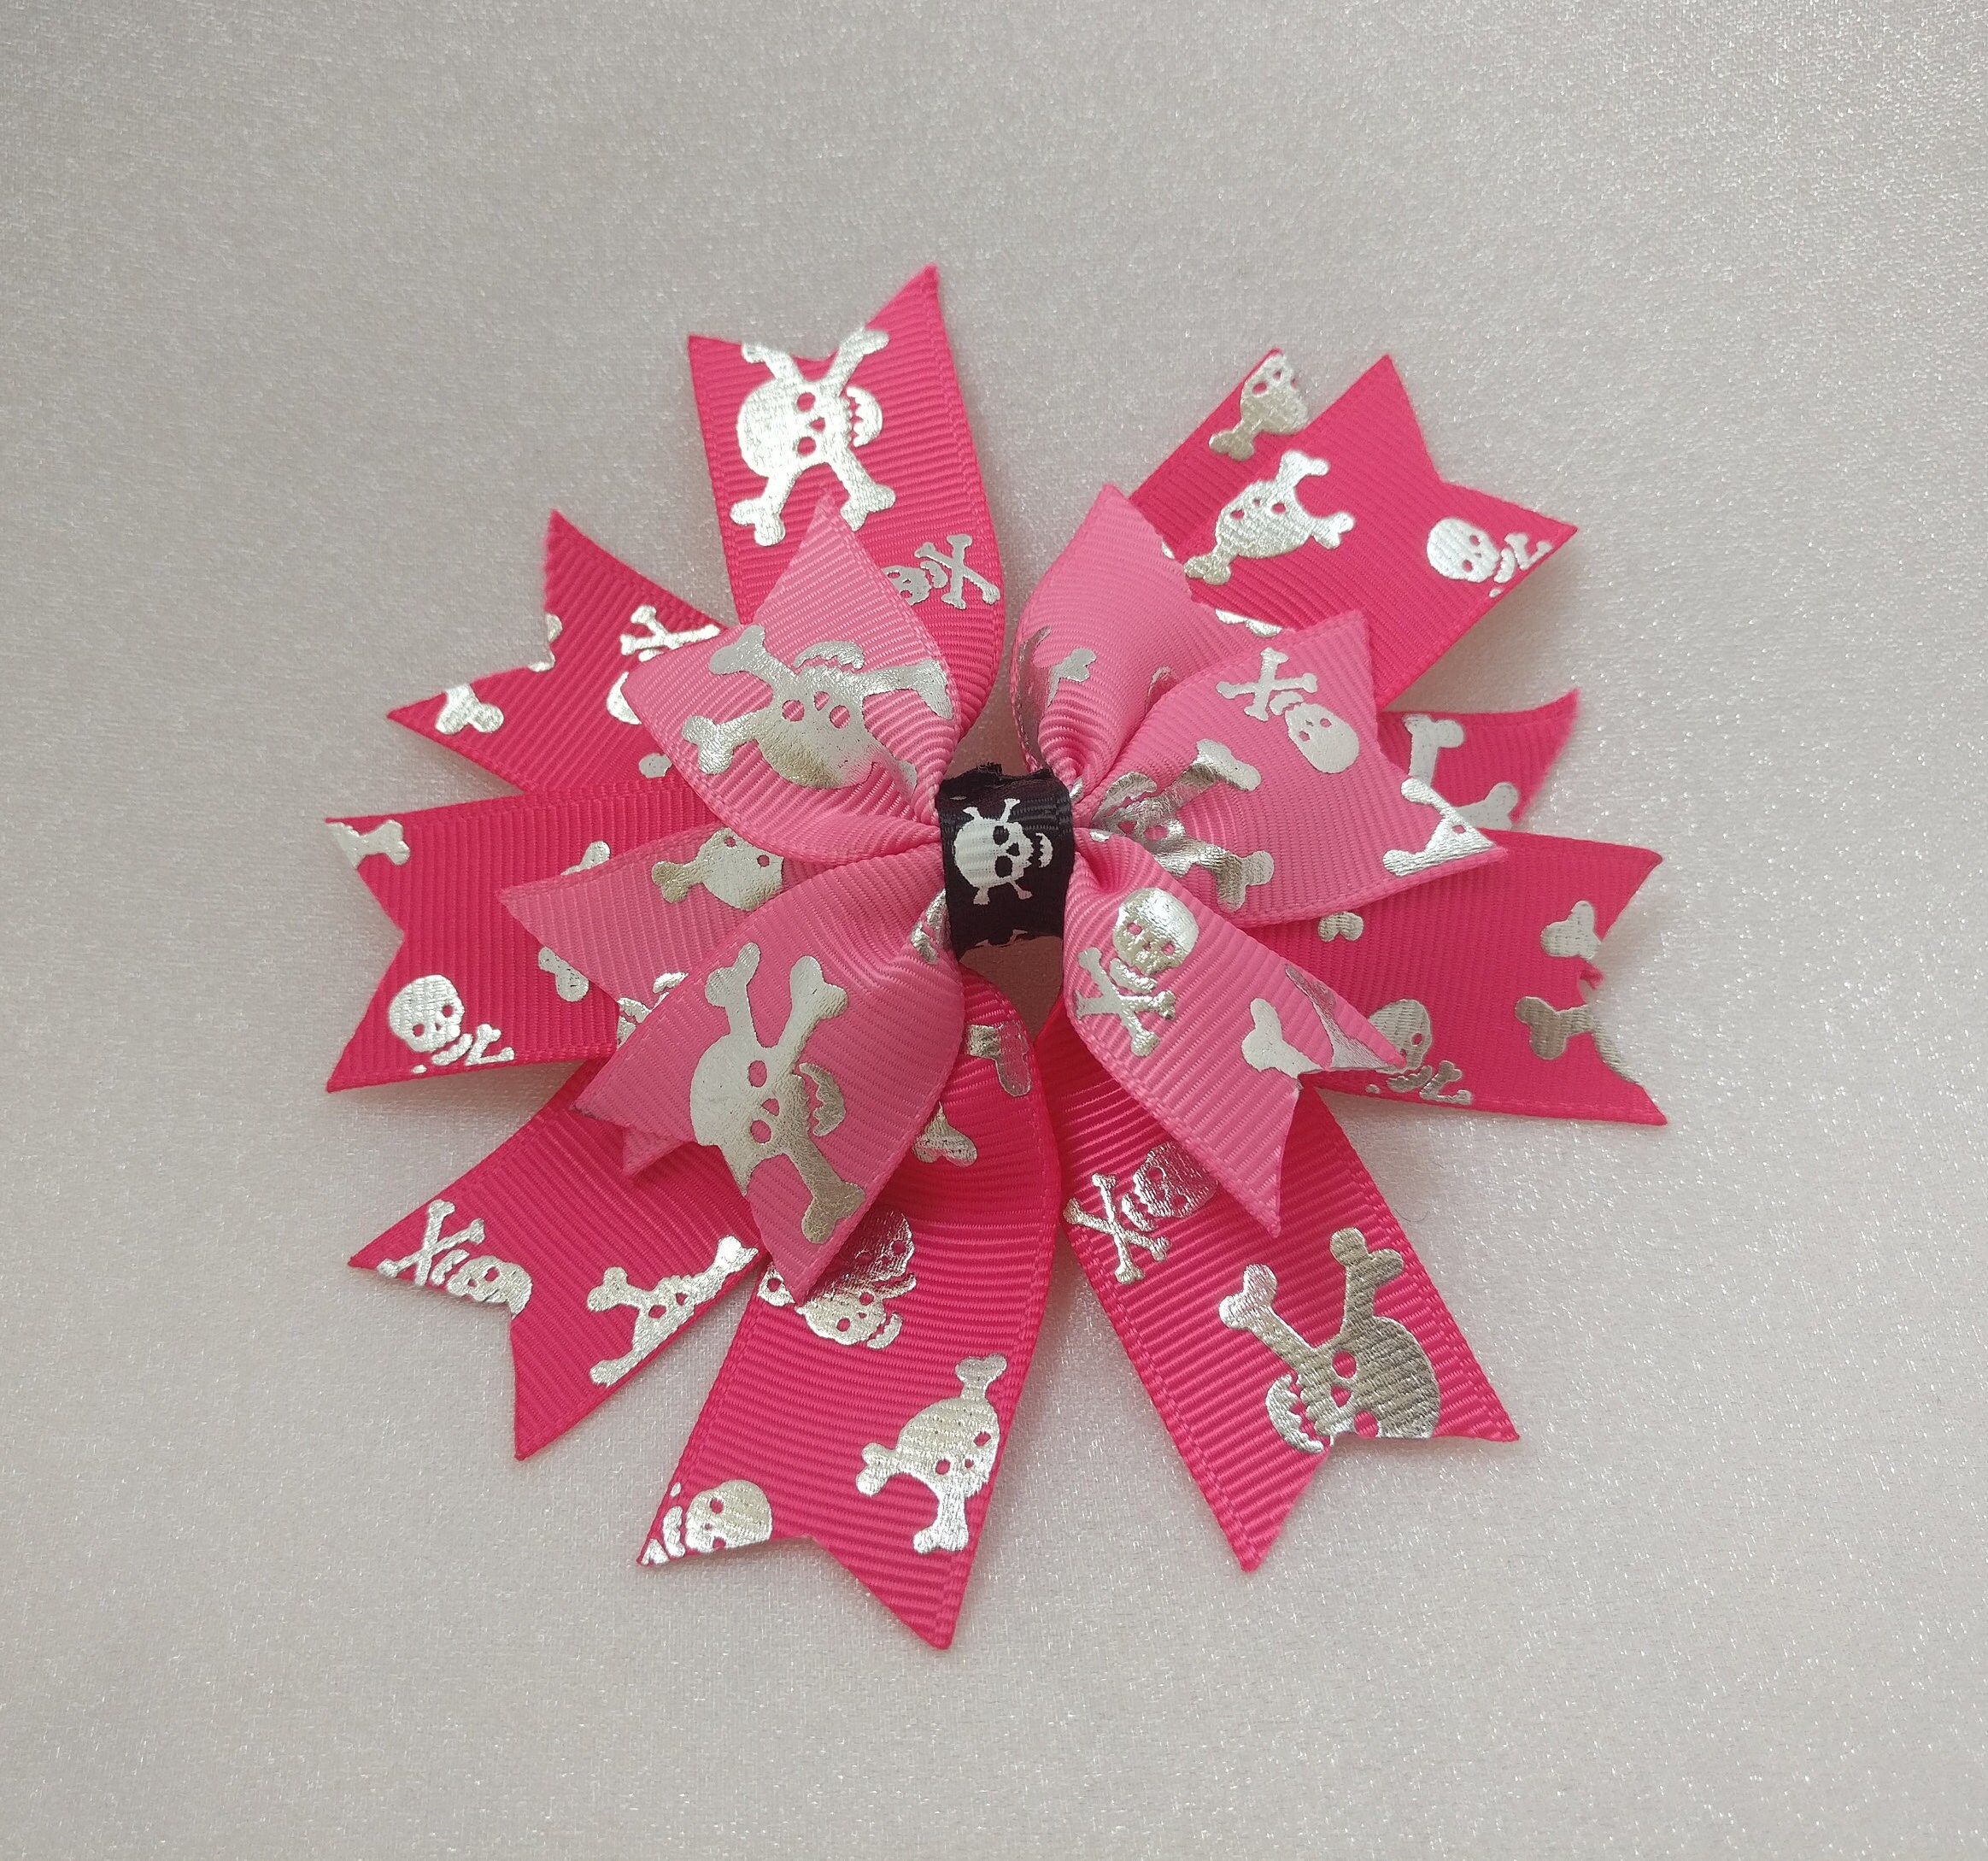 Female pirate skull and bones with pink ribbon hair bow - Pirate